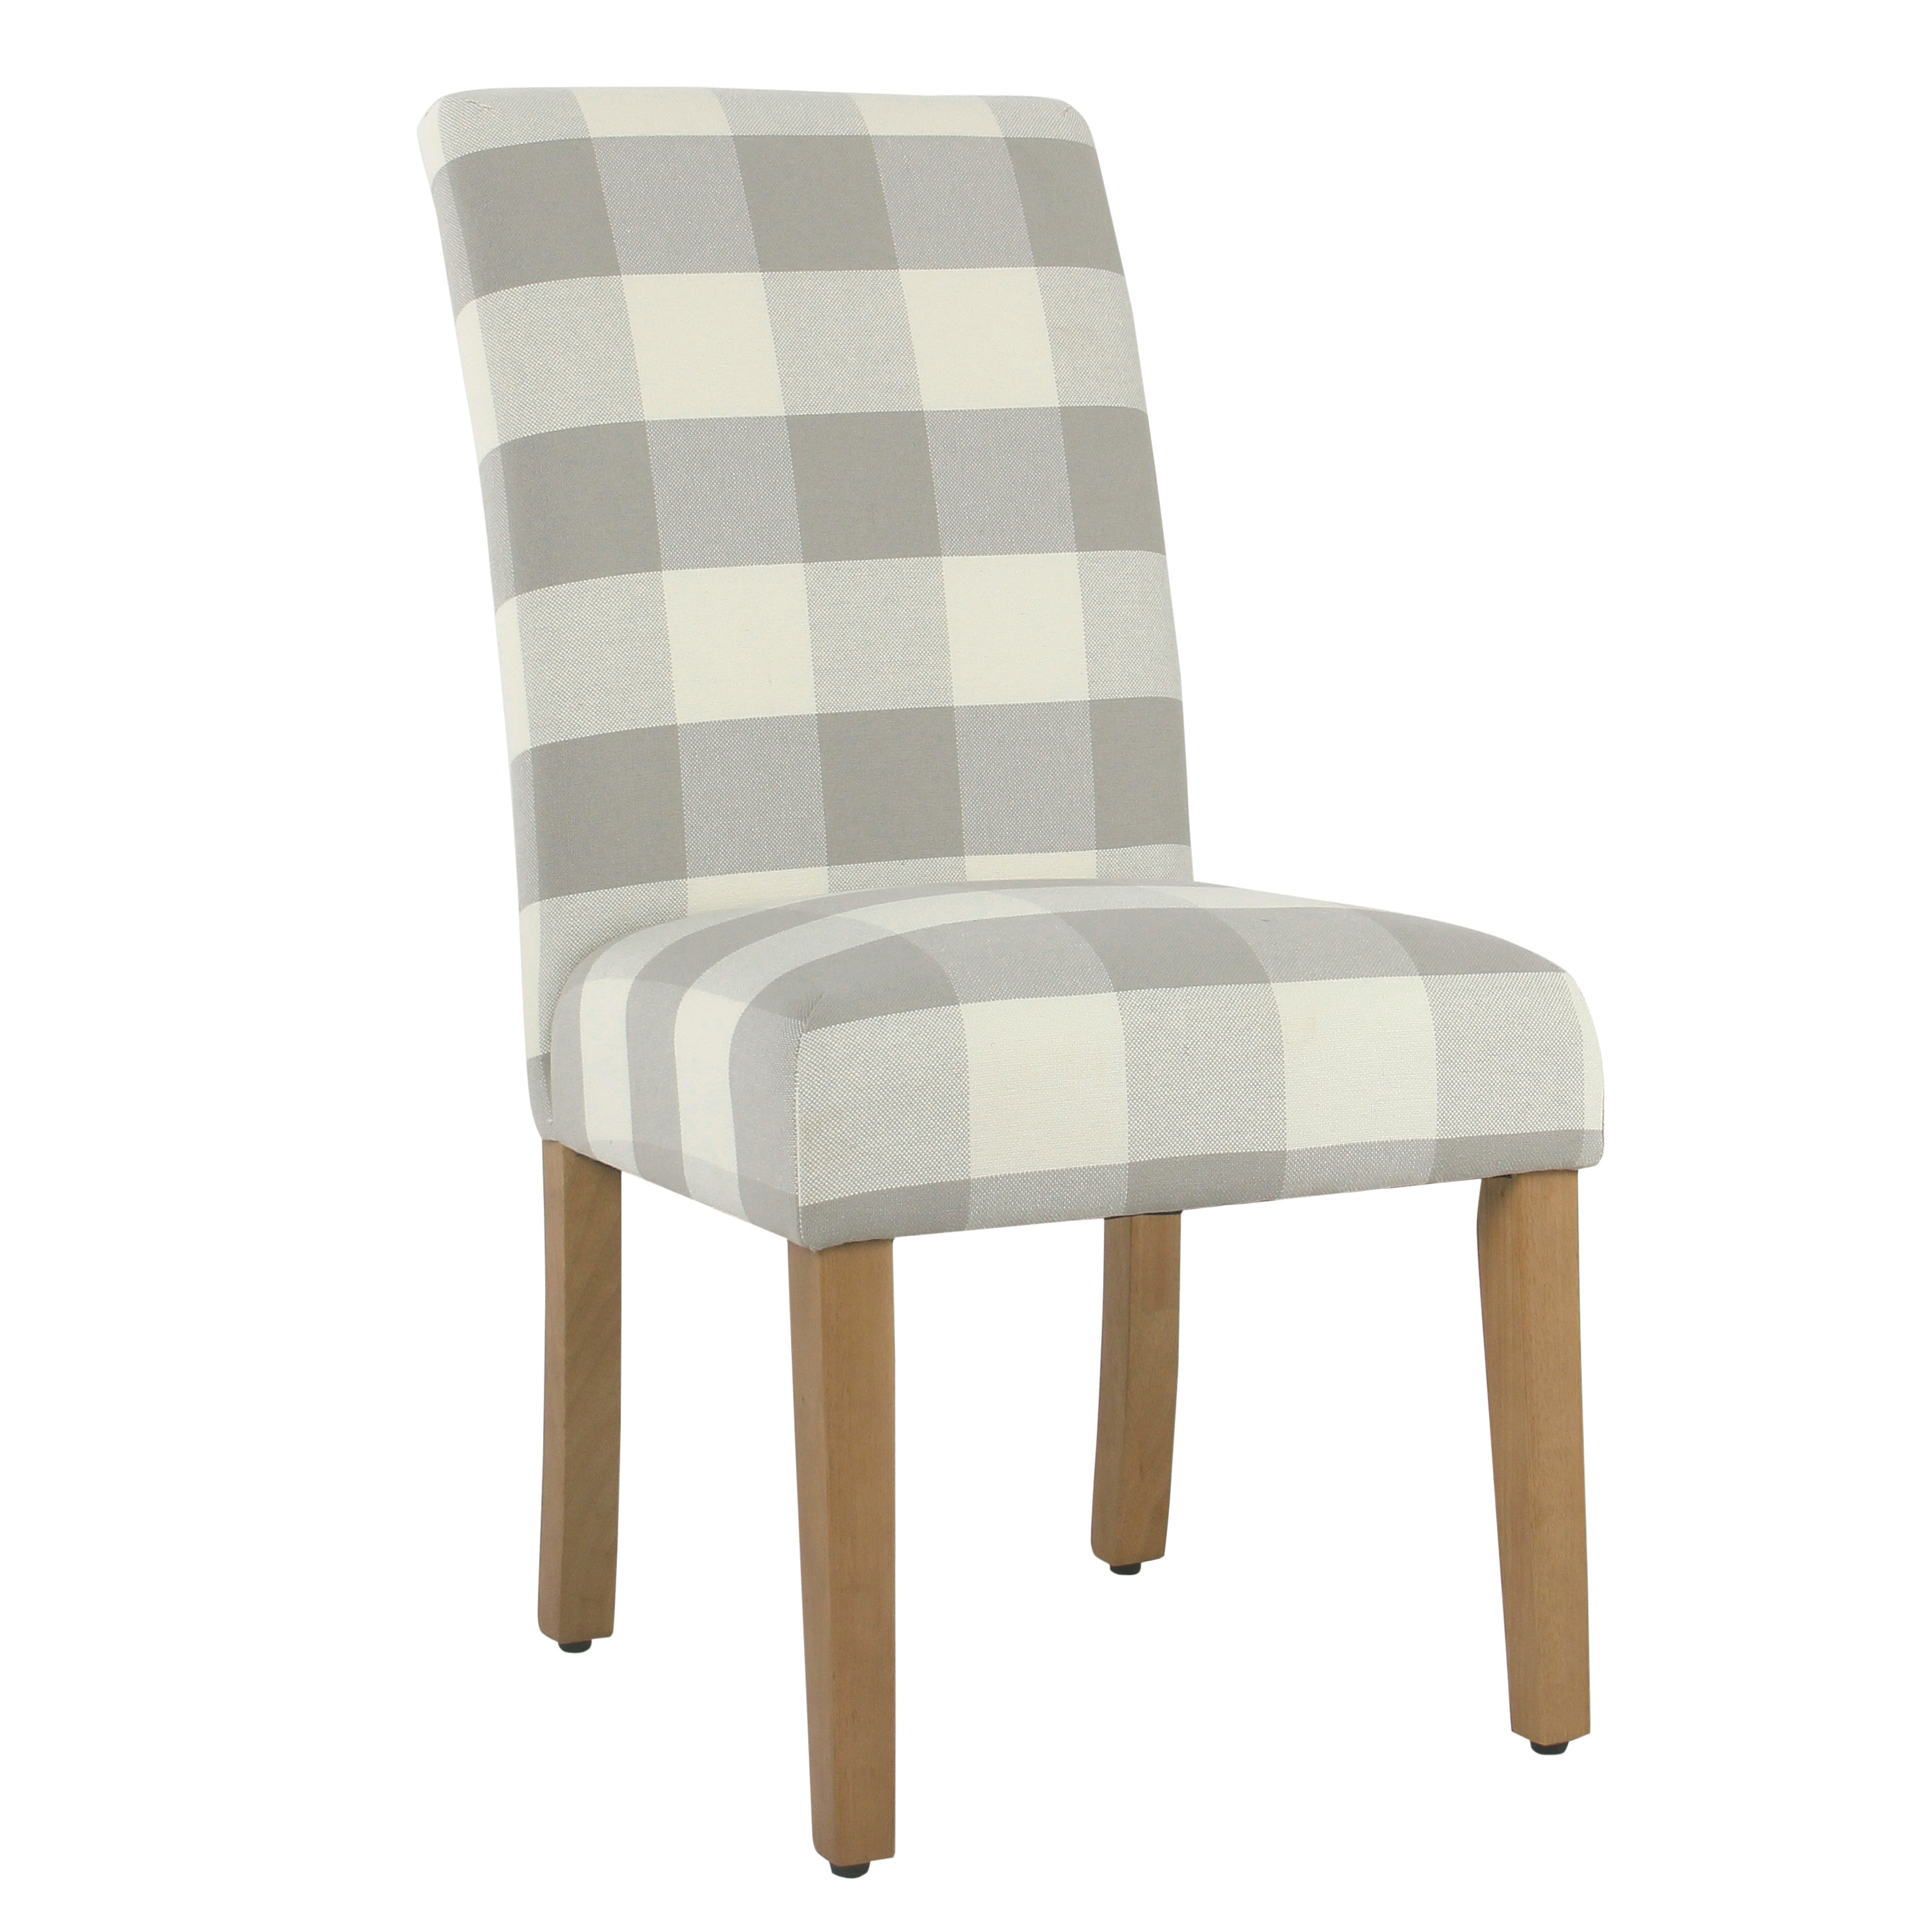 Homepop Parsons Dining Chair Gray Plaid Set Of 2 Overstock